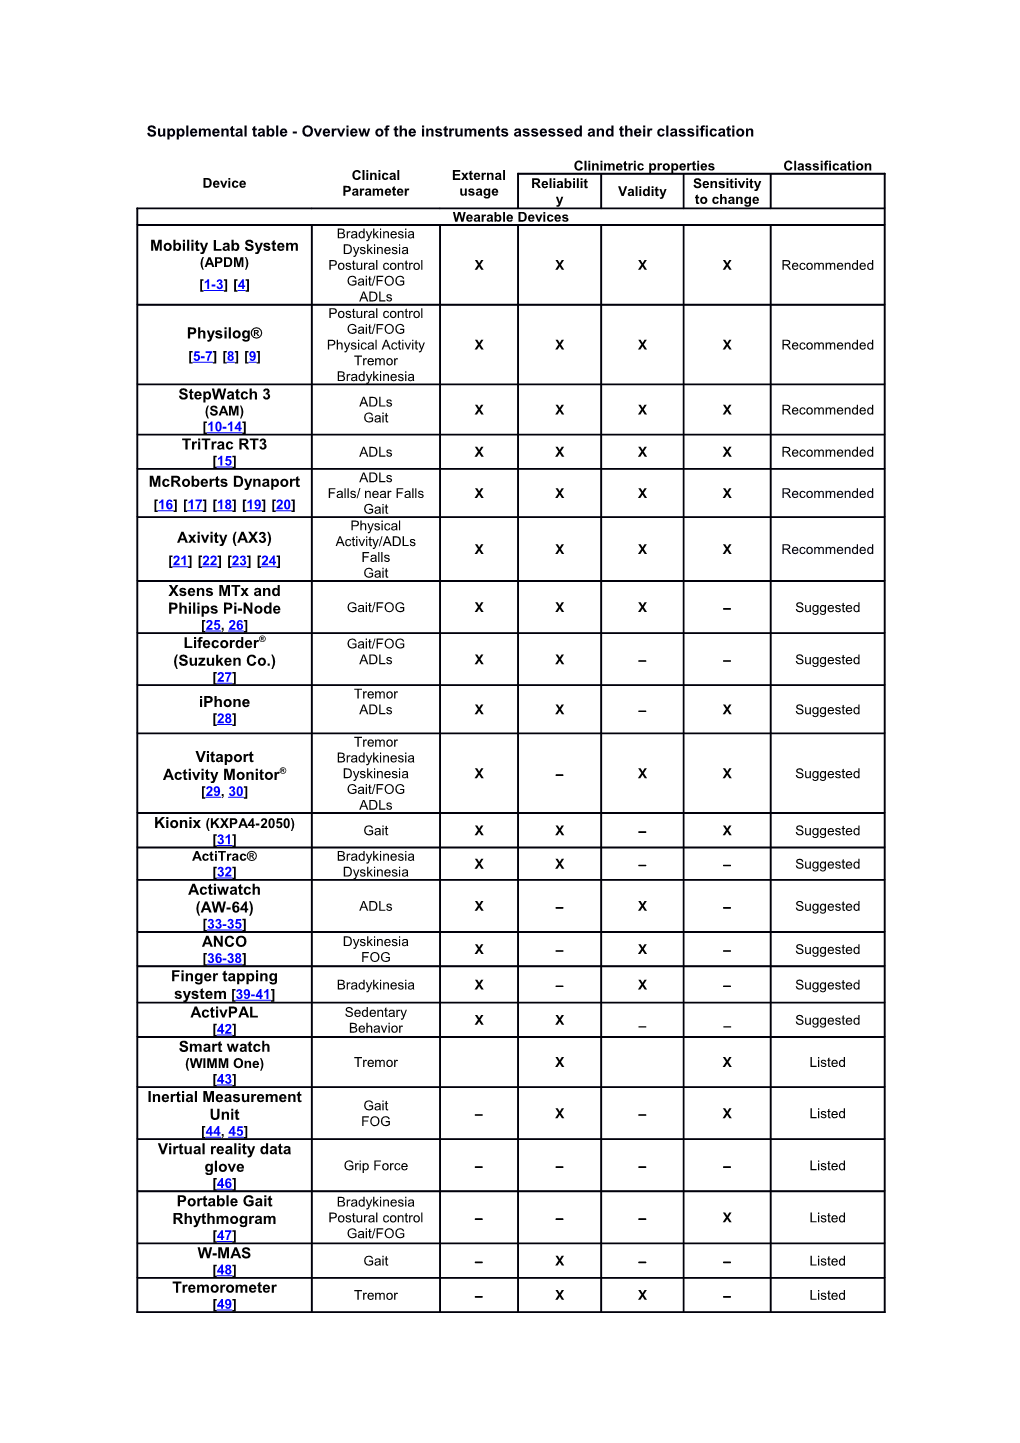 Supplemental Table- Overview of the Instruments Assessed and Their Classification